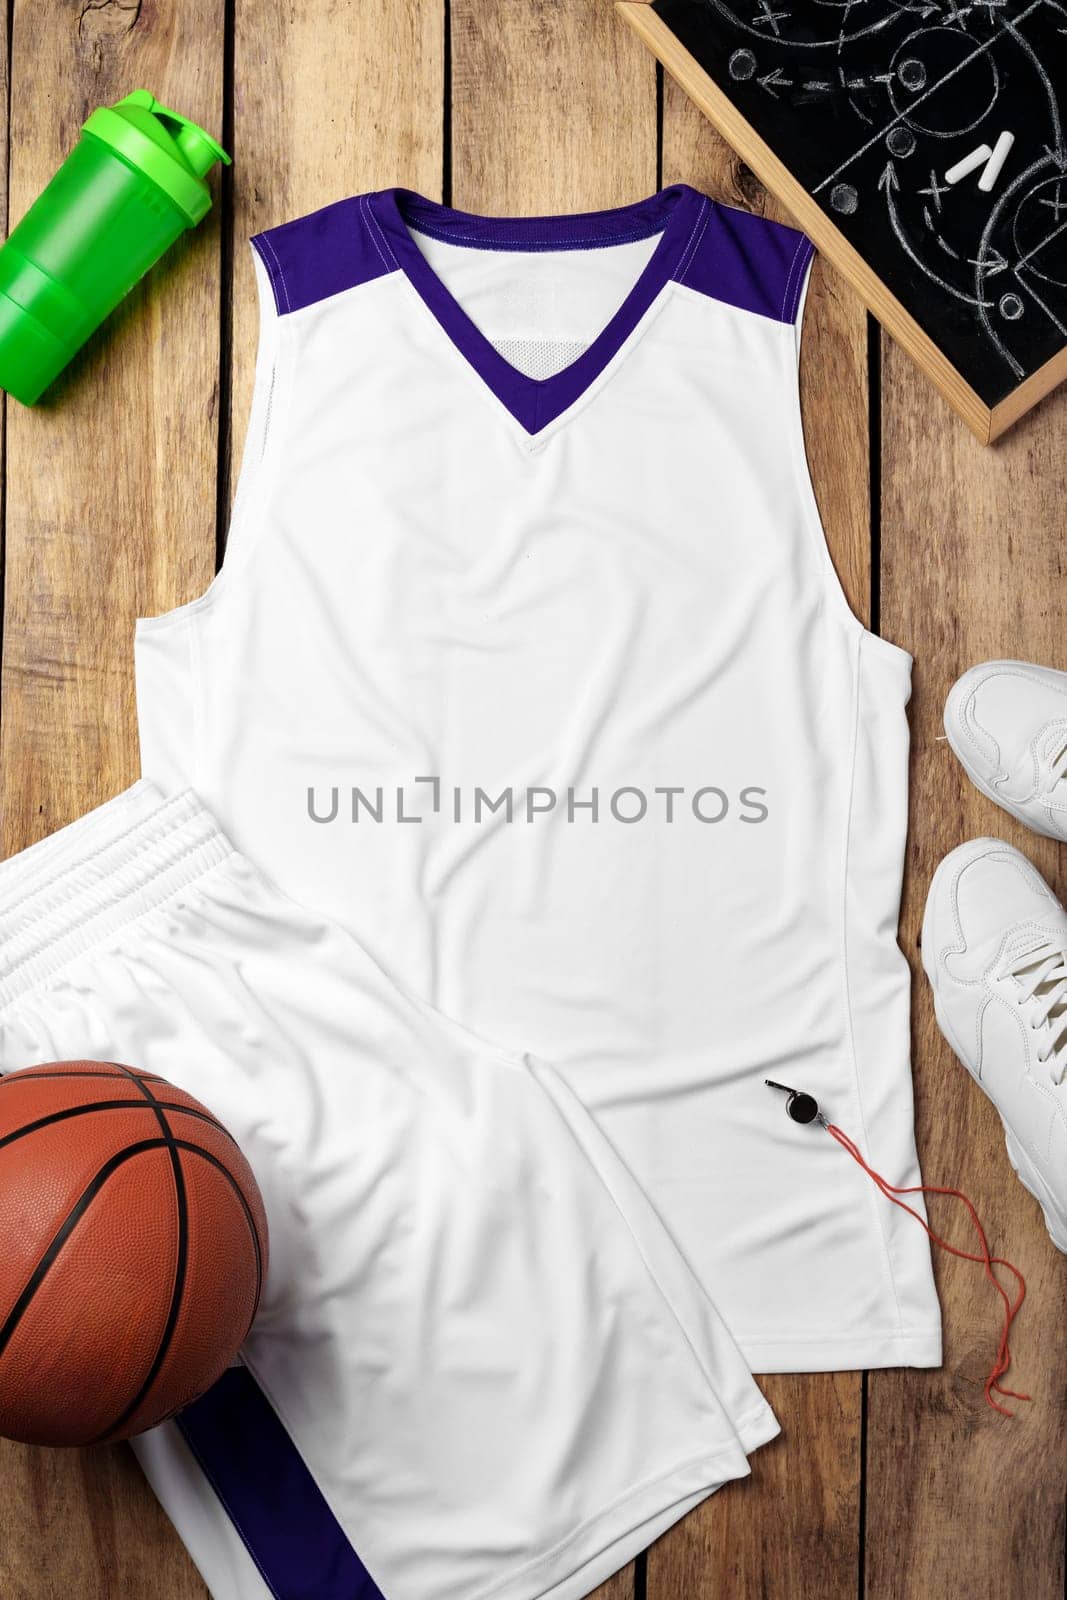 Basketball uniform on wooden background top view flat lay